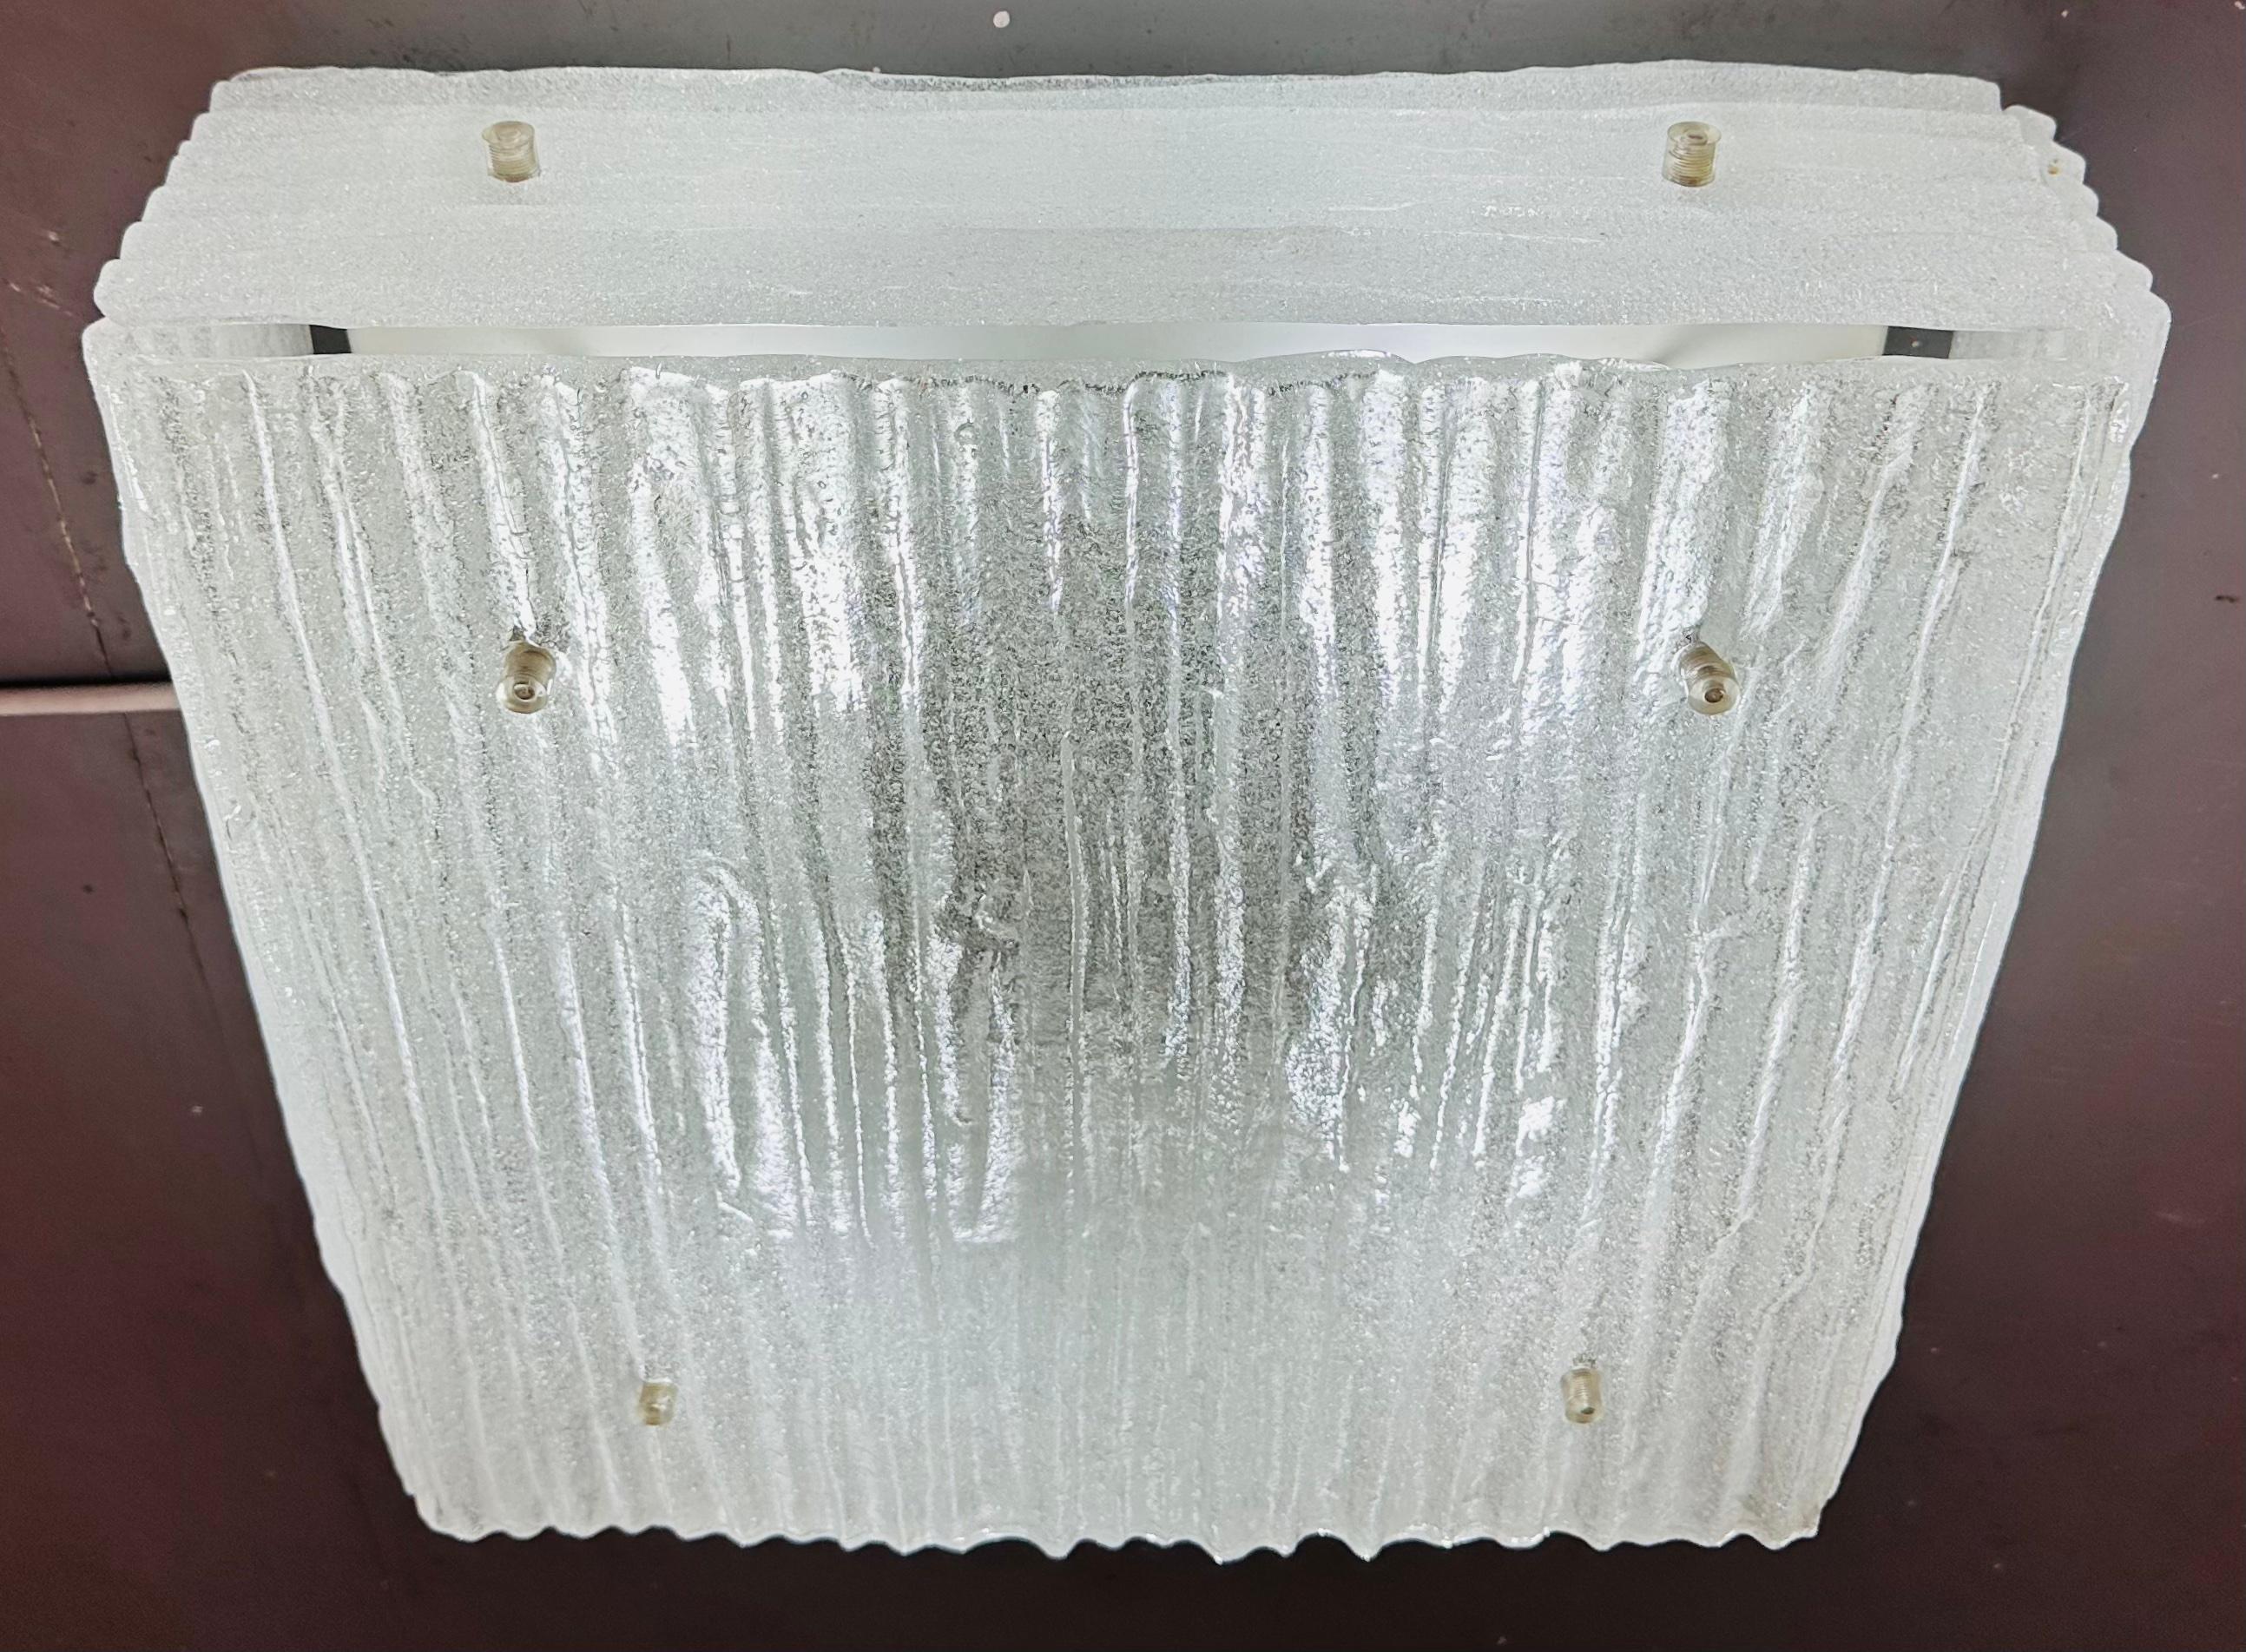 1960s Austrian flush mount ceiling light manufactured by Kalmar Leuchten. The flush mount features four thick rippled Murano frosted glass sides and one large element attached to a white metal frame. The glass is secured onto the frame with screws